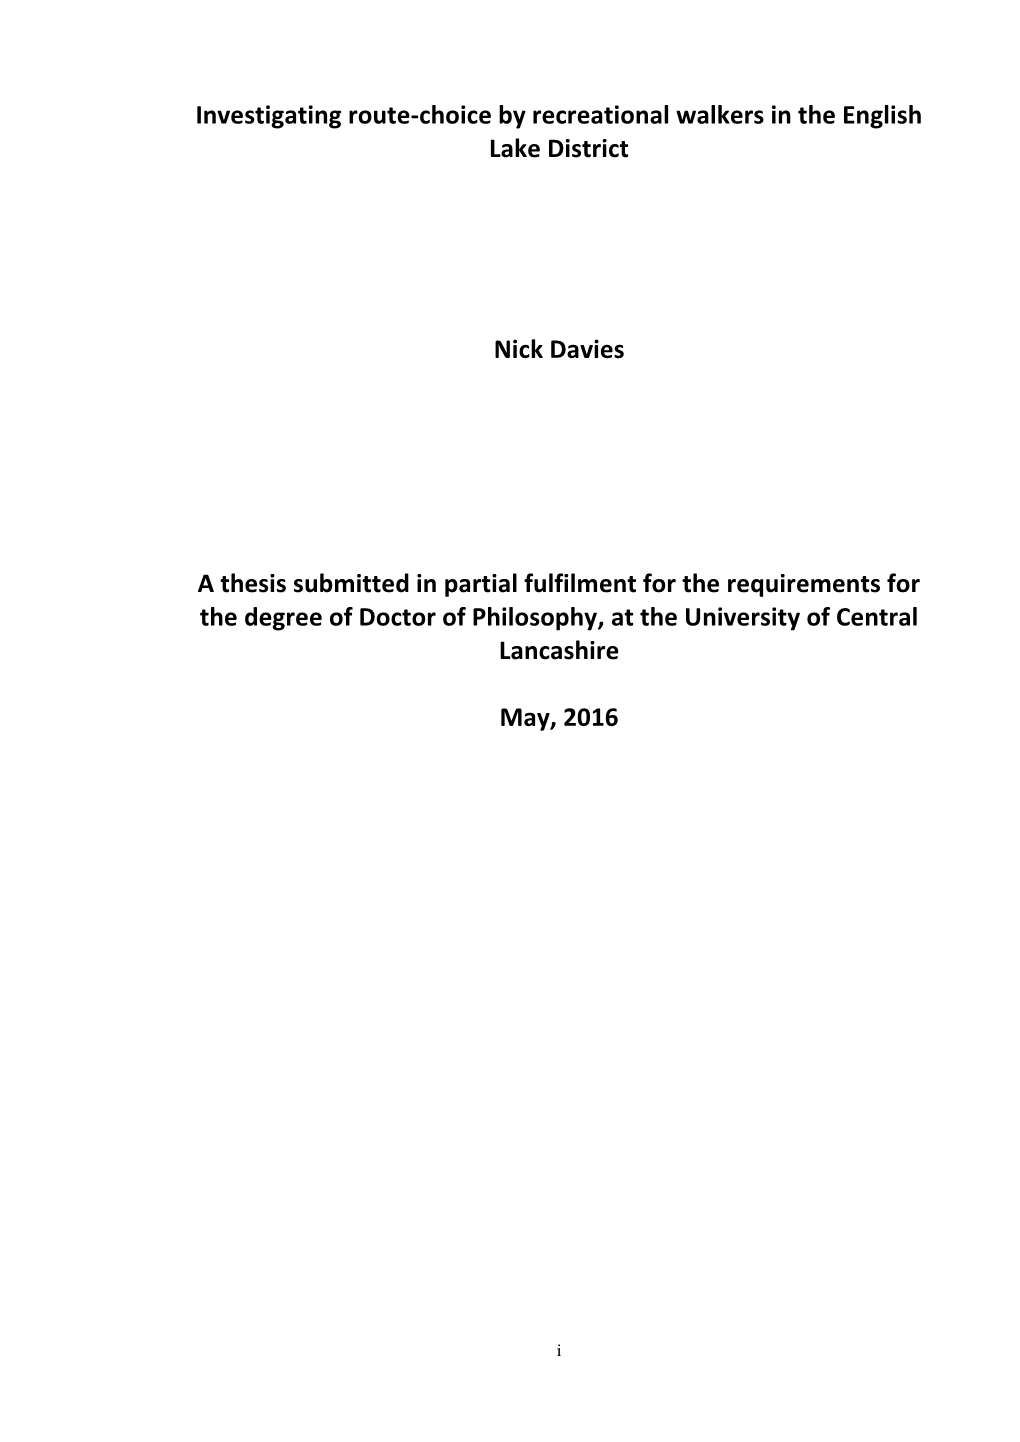 Investigating Route-Choice by Recreational Walkers in the English Lake District Nick Davies a Thesis Submitted in Partial Fulfil